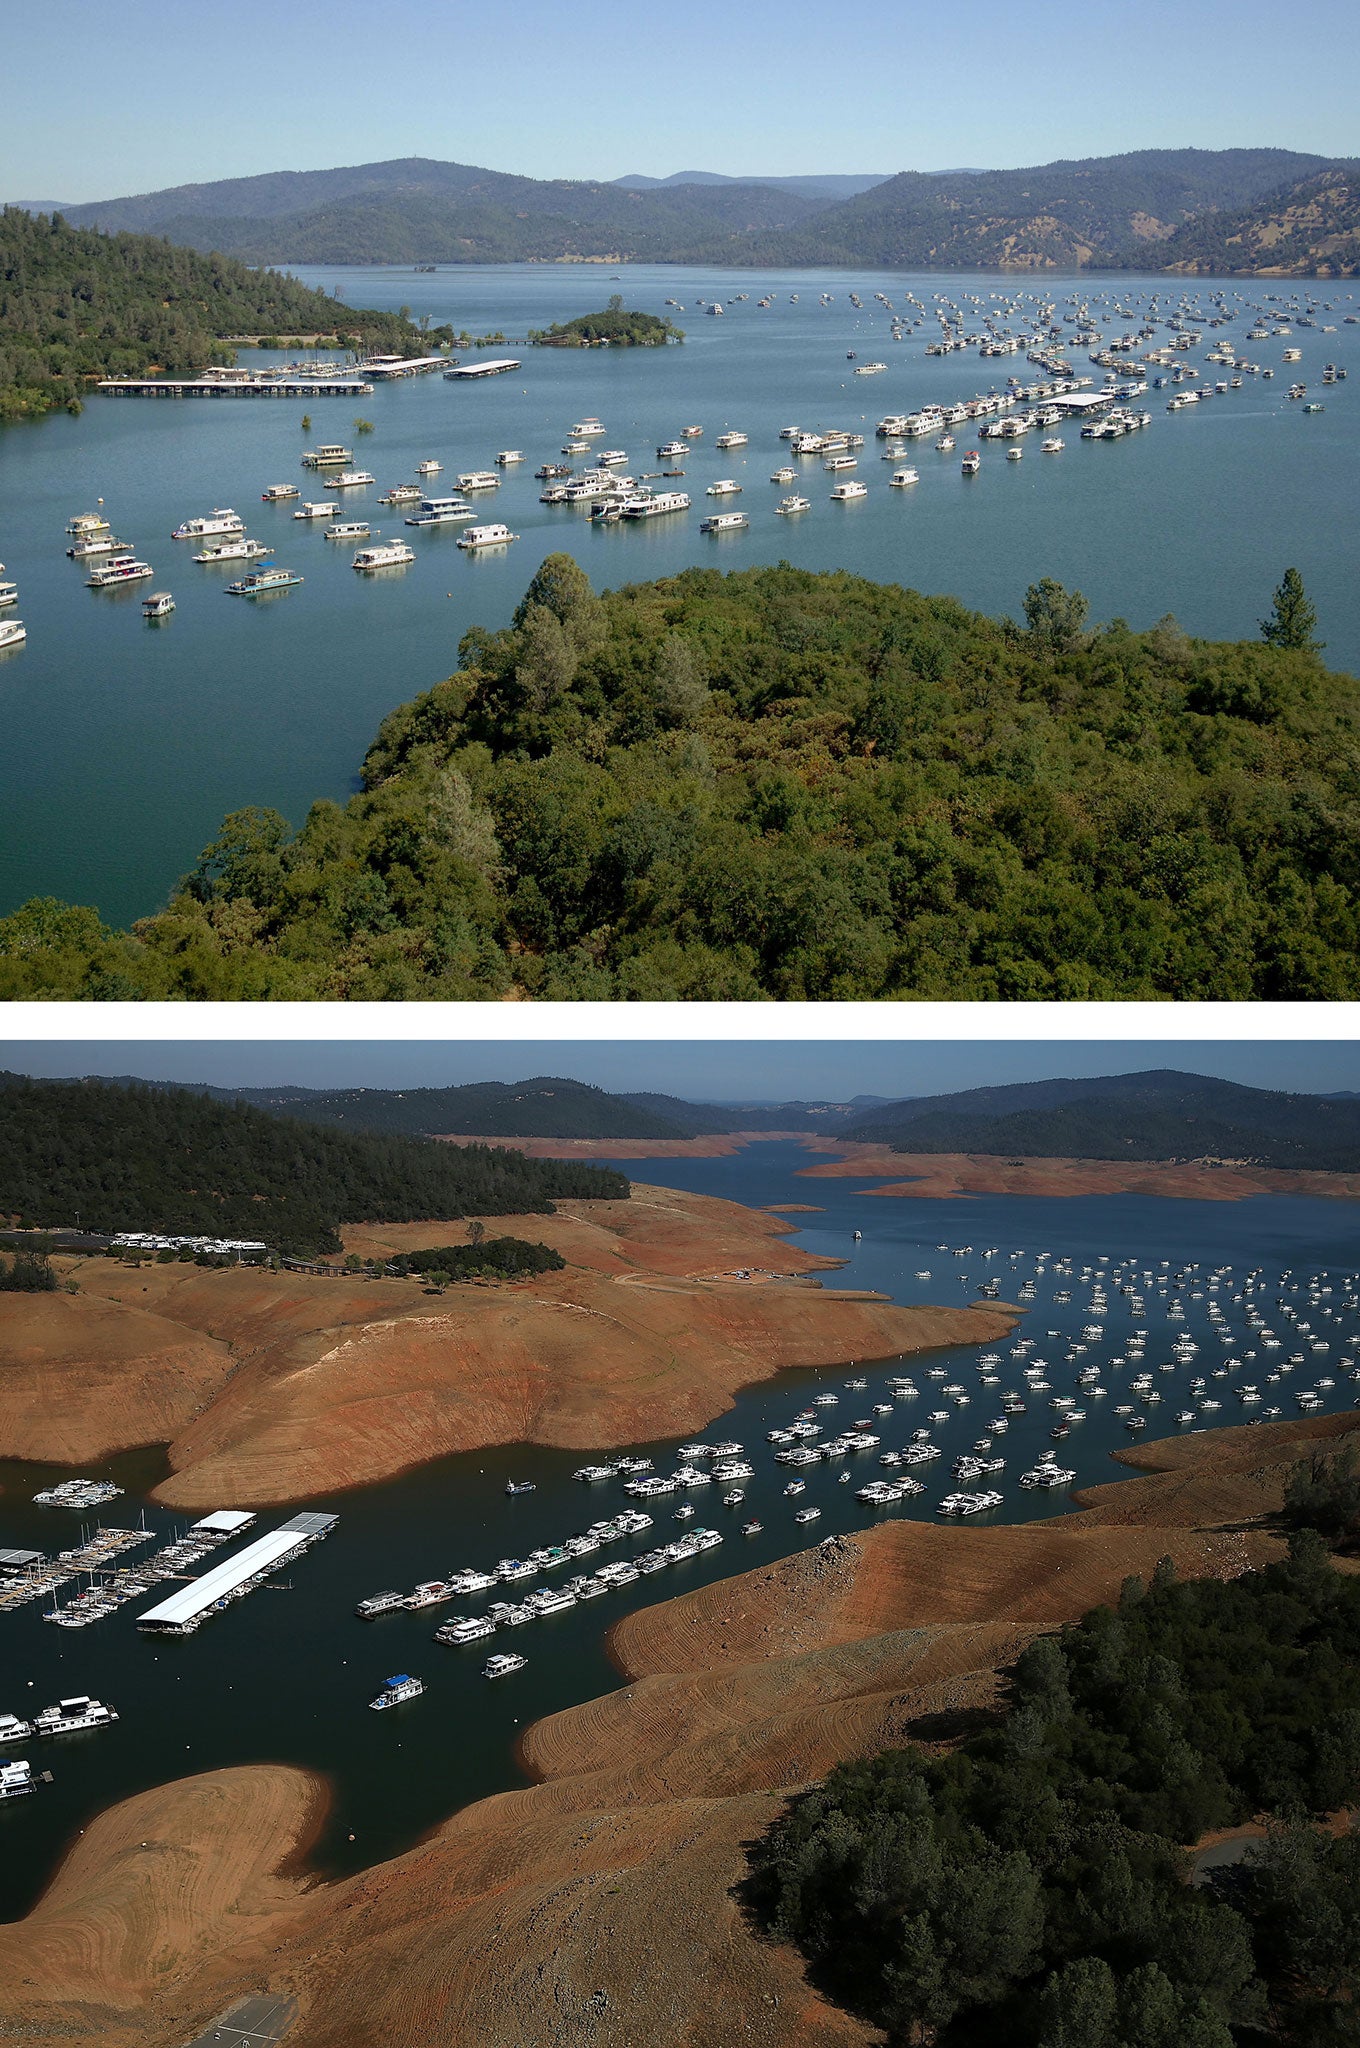 The Bidwell Marina in Oroville